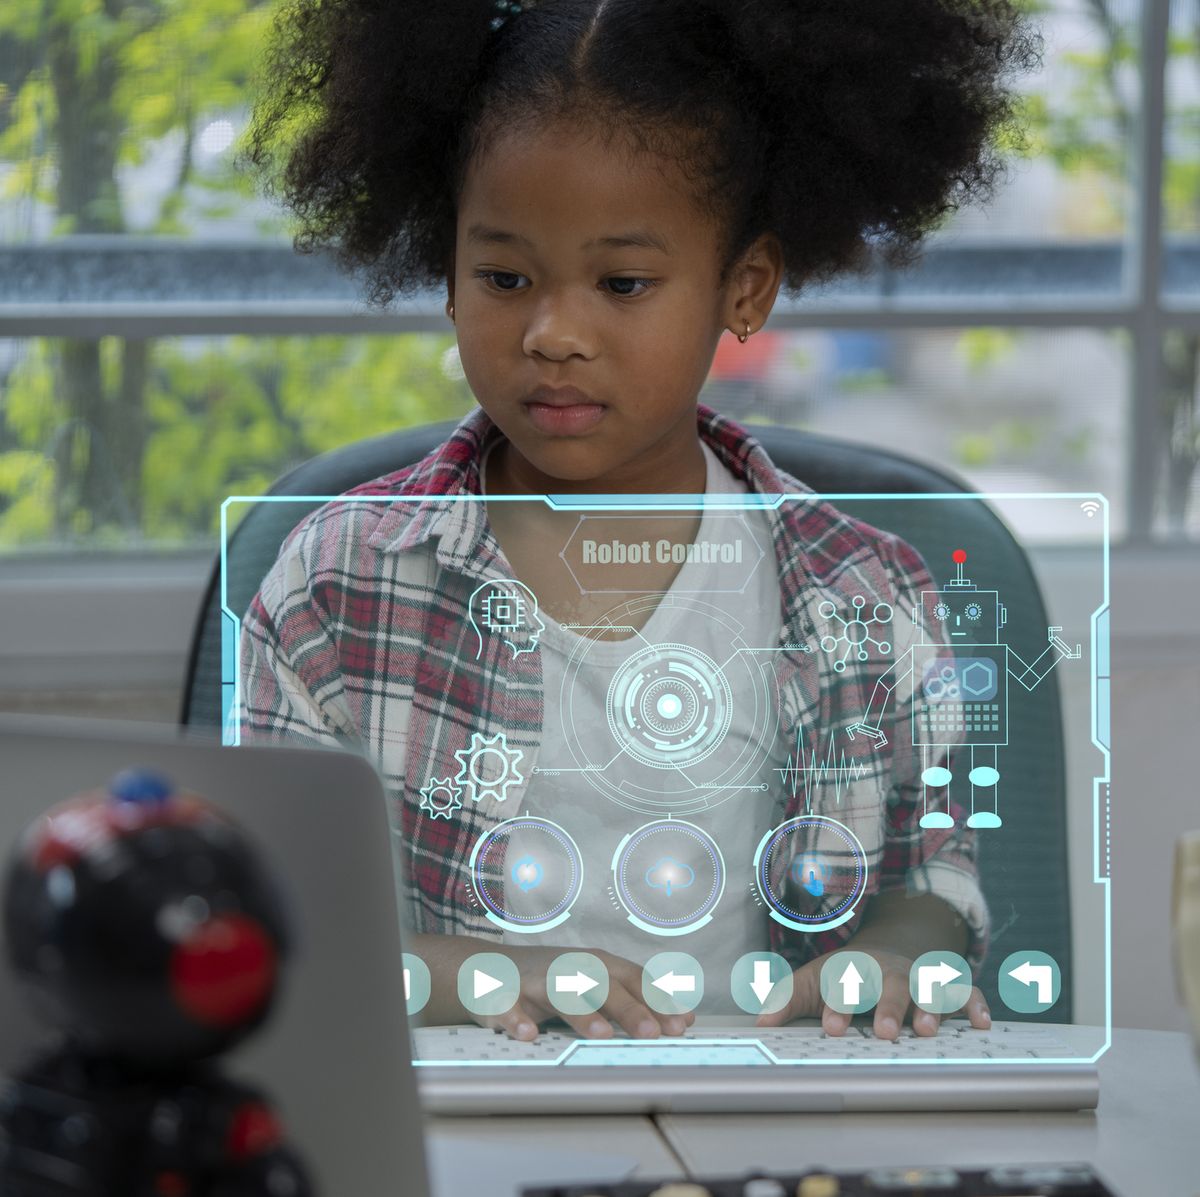 https://hips.hearstapps.com/hmg-prod/images/girl-thinking-and-analyzing-a-robot-program-royalty-free-image-1651867434.jpg?crop=0.668xw:1.00xh;0.141xw,0&resize=1200:*